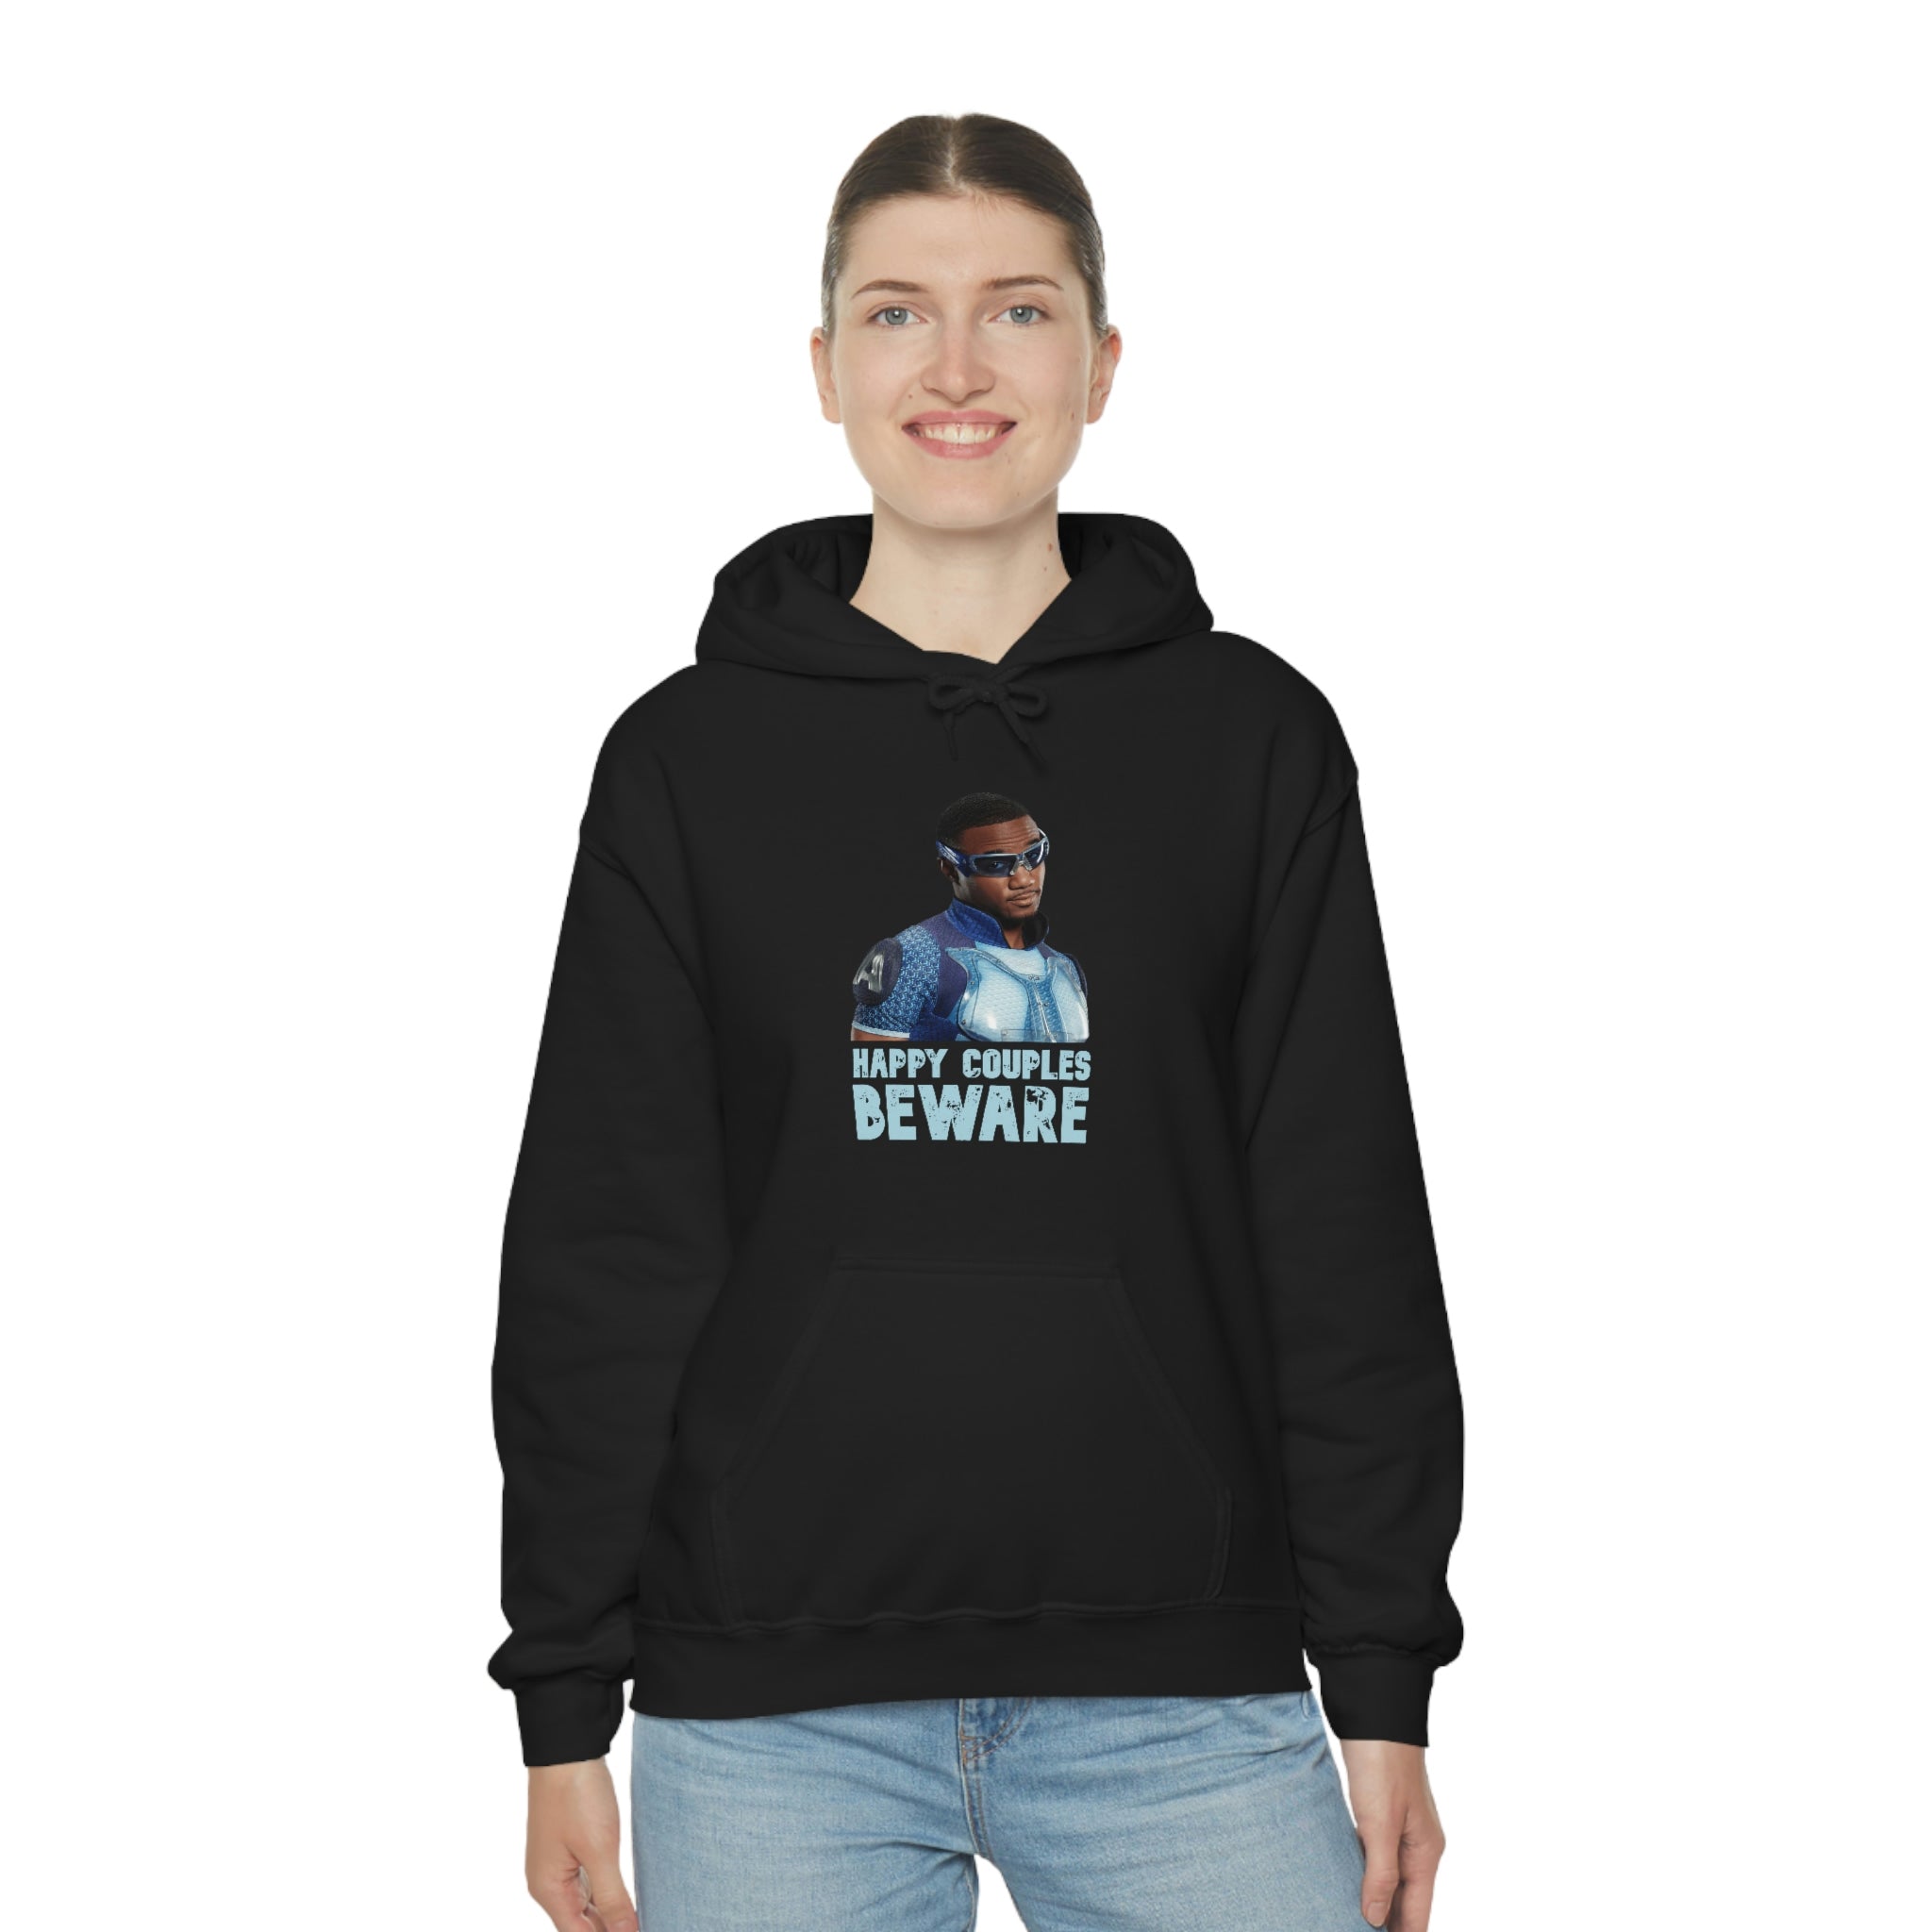 Copy of Gaslighting isn't real You're just crazy - Unisex Heavy Blend™ Hooded Sweatshirt - ALL COLORS